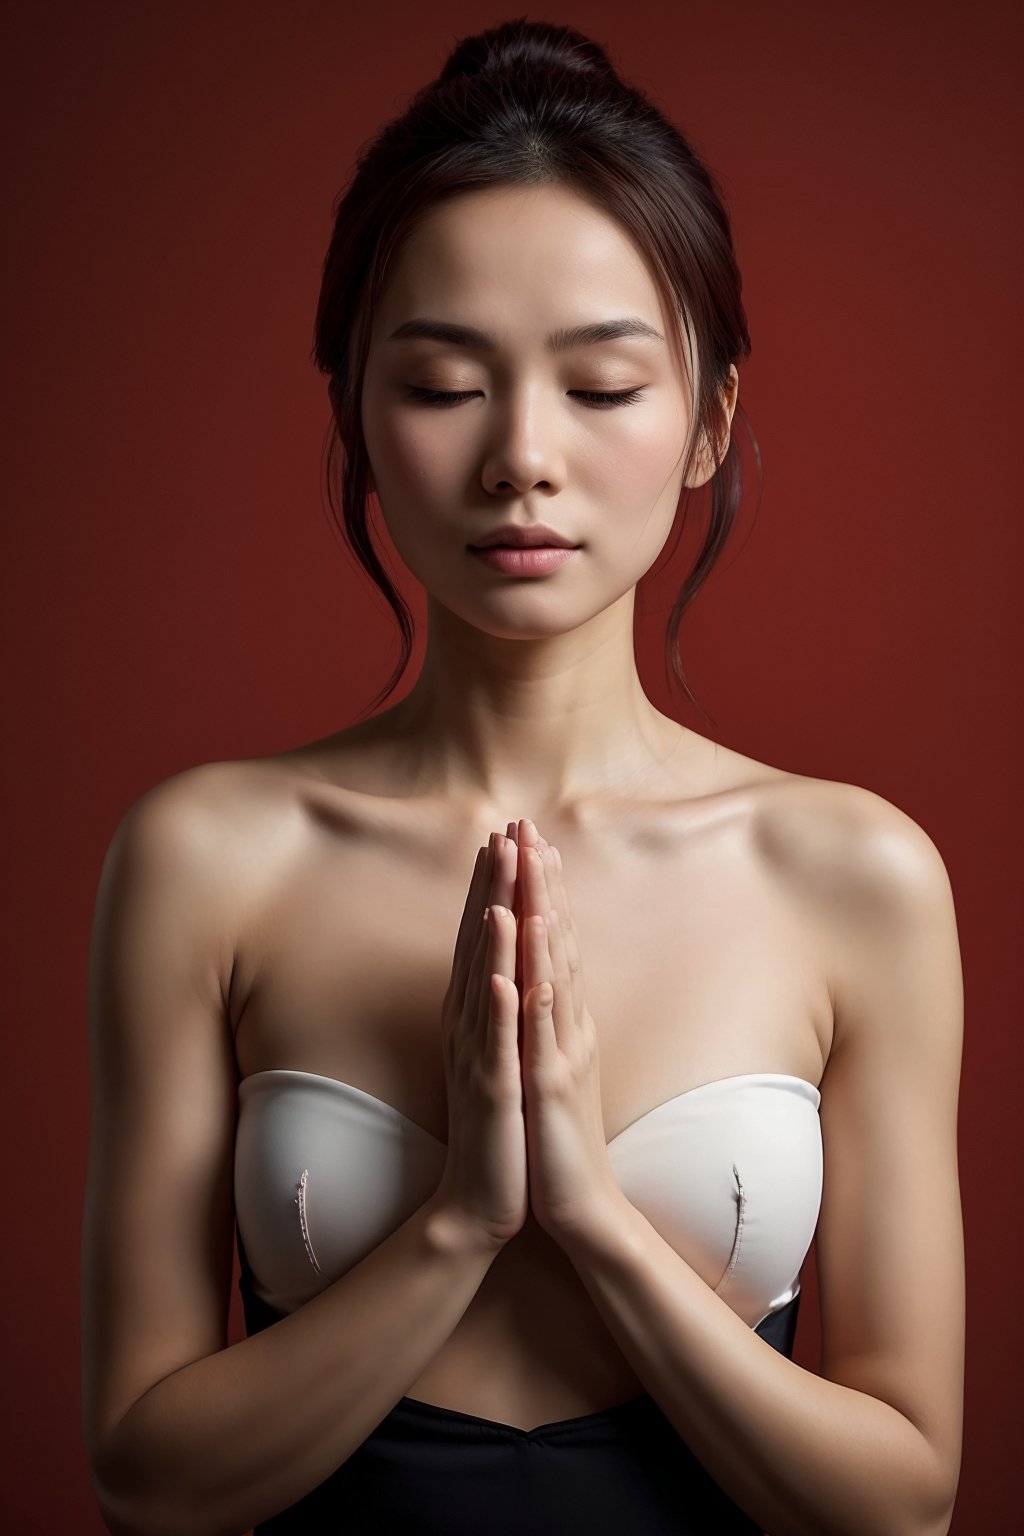 A Chinese ancient beauty is praying, with hands clasped together, eyes closed in silence, wearing a solemn yet beautiful expression, Red Background, poakl